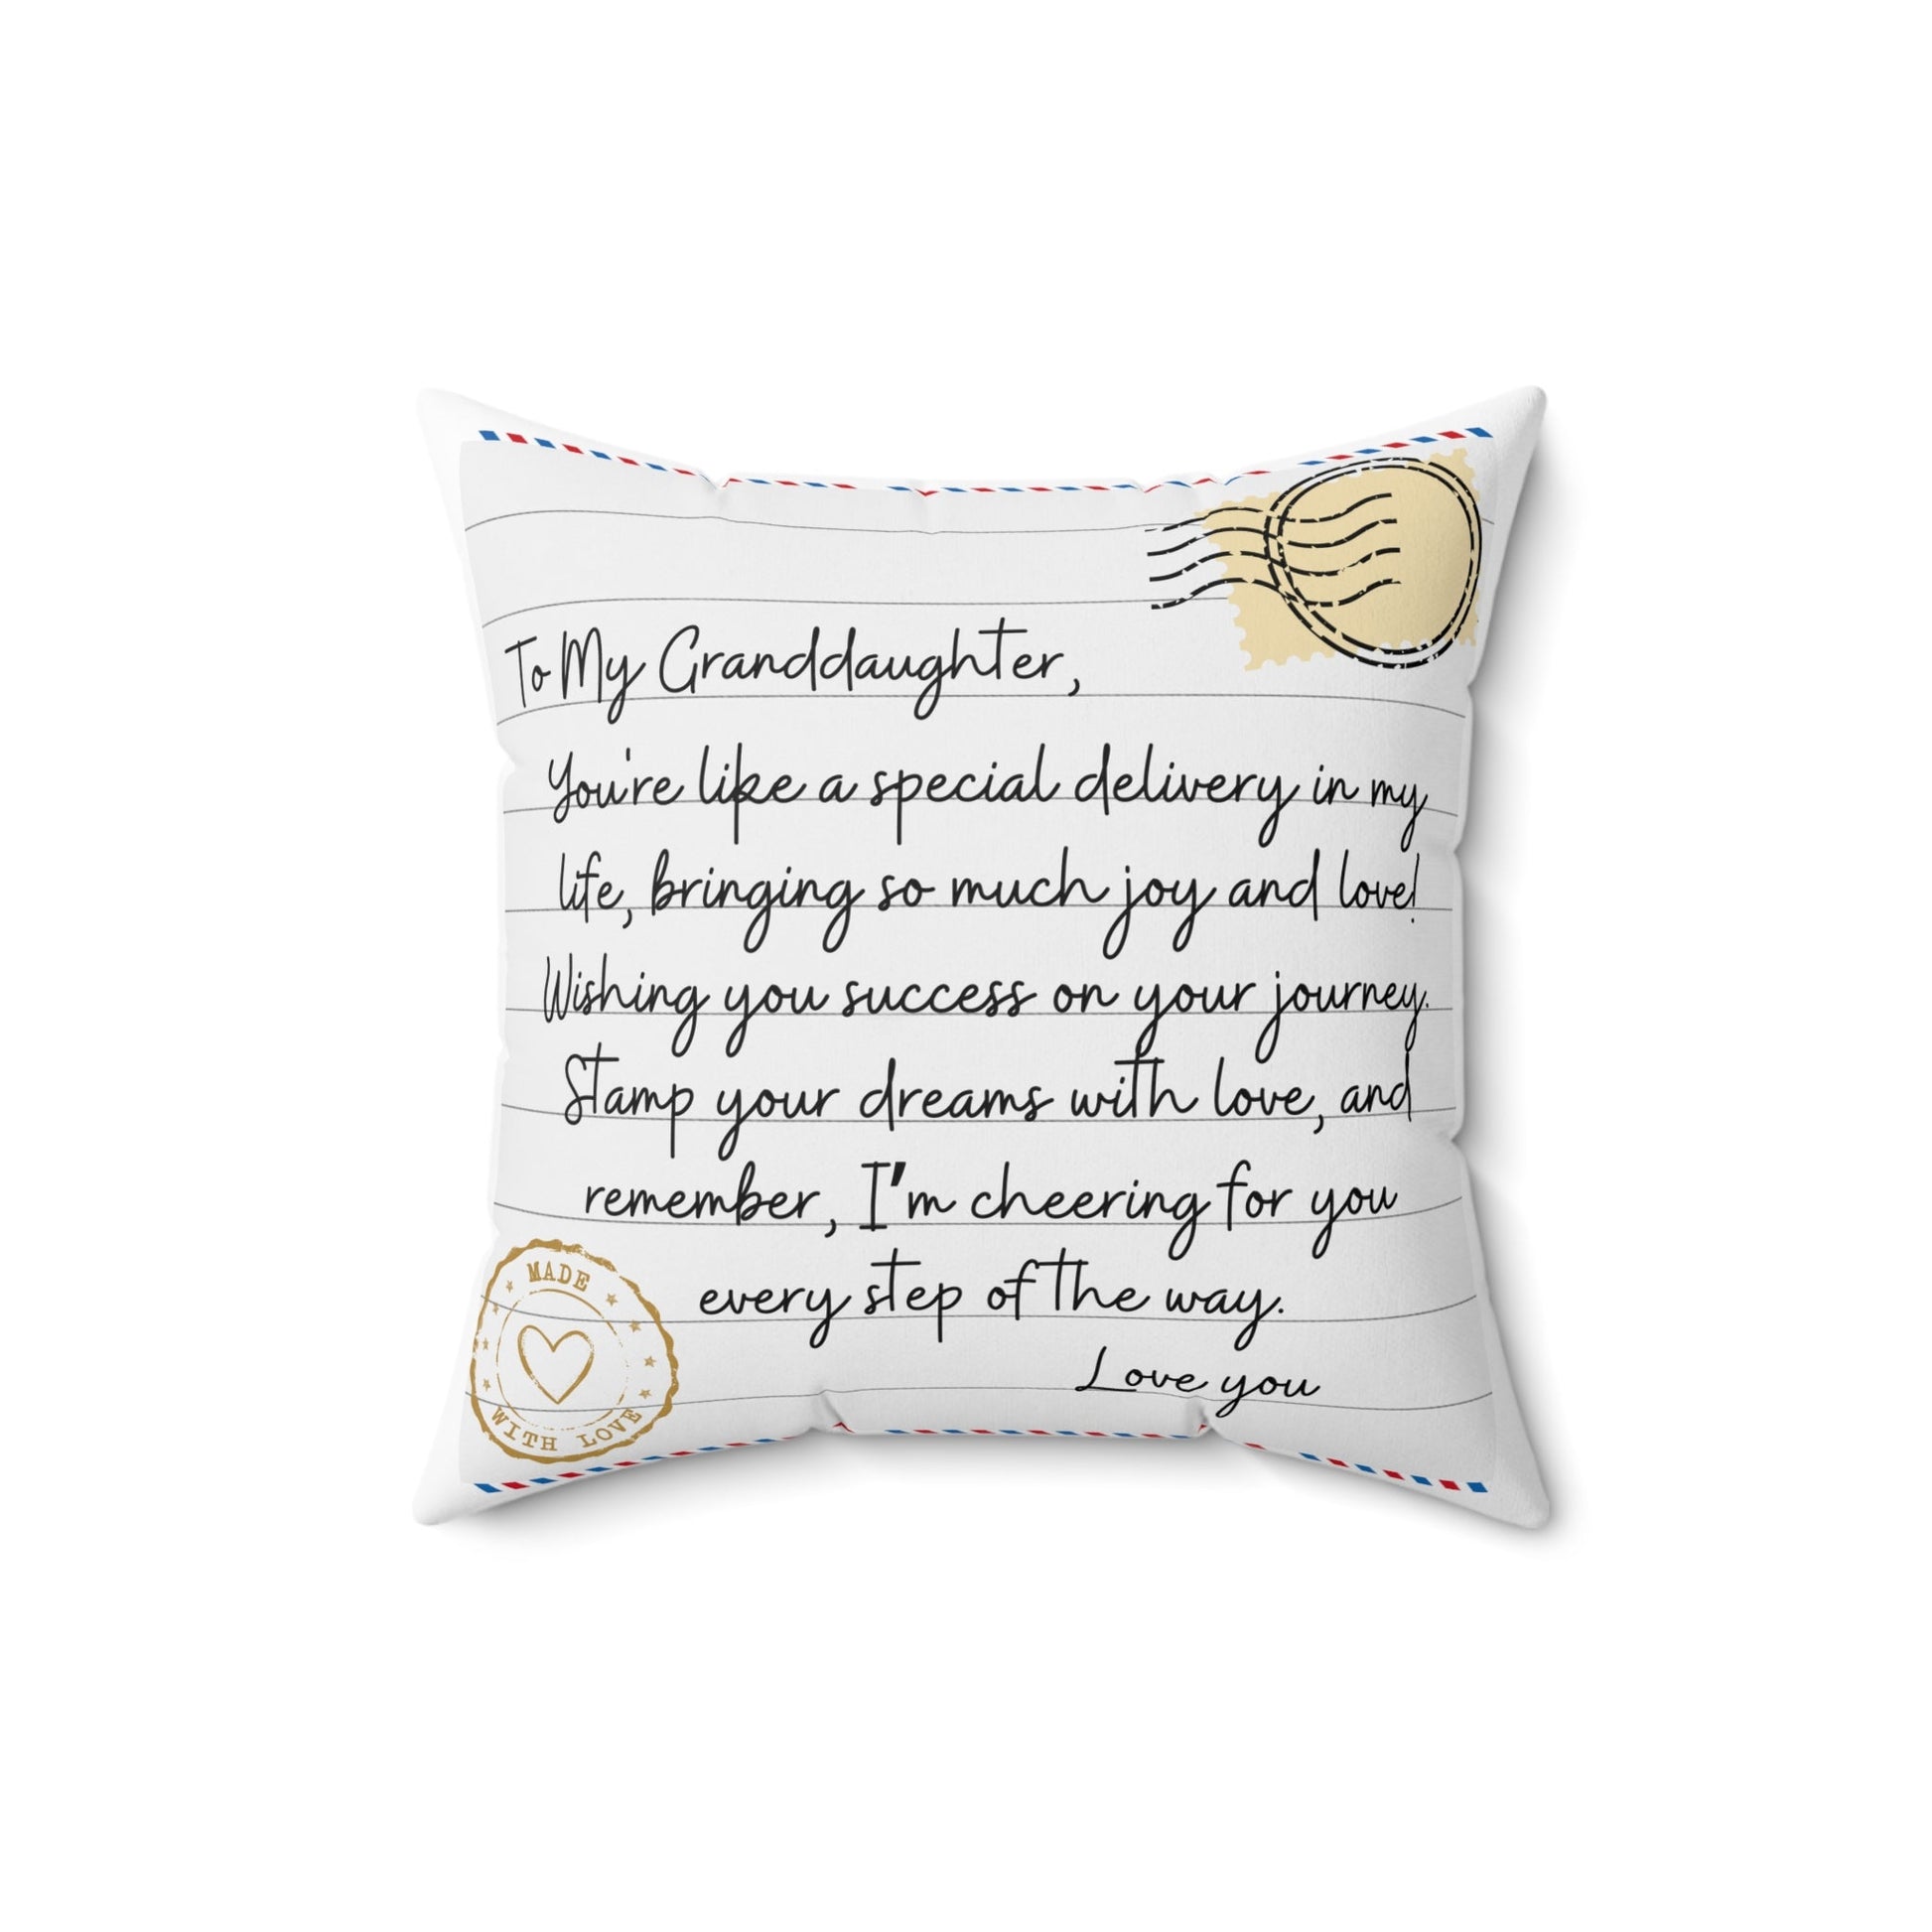 Stamped With Love Pillow for Granddaughter - 16’ × Home